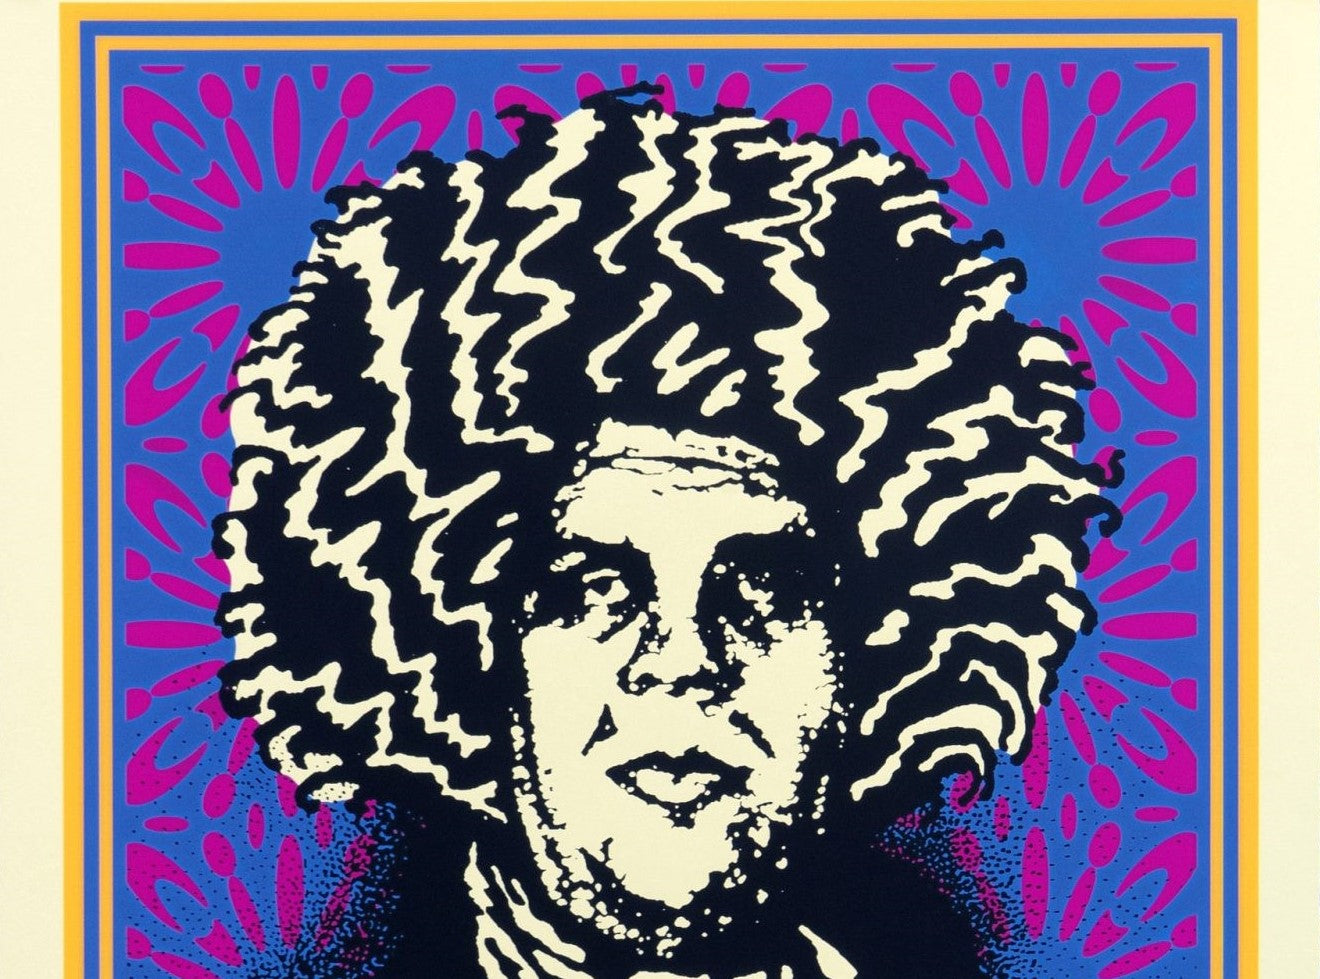 Title: Andre Psychedelic (Large Format)  Artist: Shepard Fairey  Edition: Signed by Shepard Fairey in a limited edition of 89 prints total  Type: Serigraph on Coventry Rag, 100% Cotton Custom Archival Paper with hand-deckled edges  Size: 30" x 41"  Notes: Check out our other listings for more hard-to-find and out-of-print posters.  Comes with a certificate of authenticity.  In house and ready to ship!